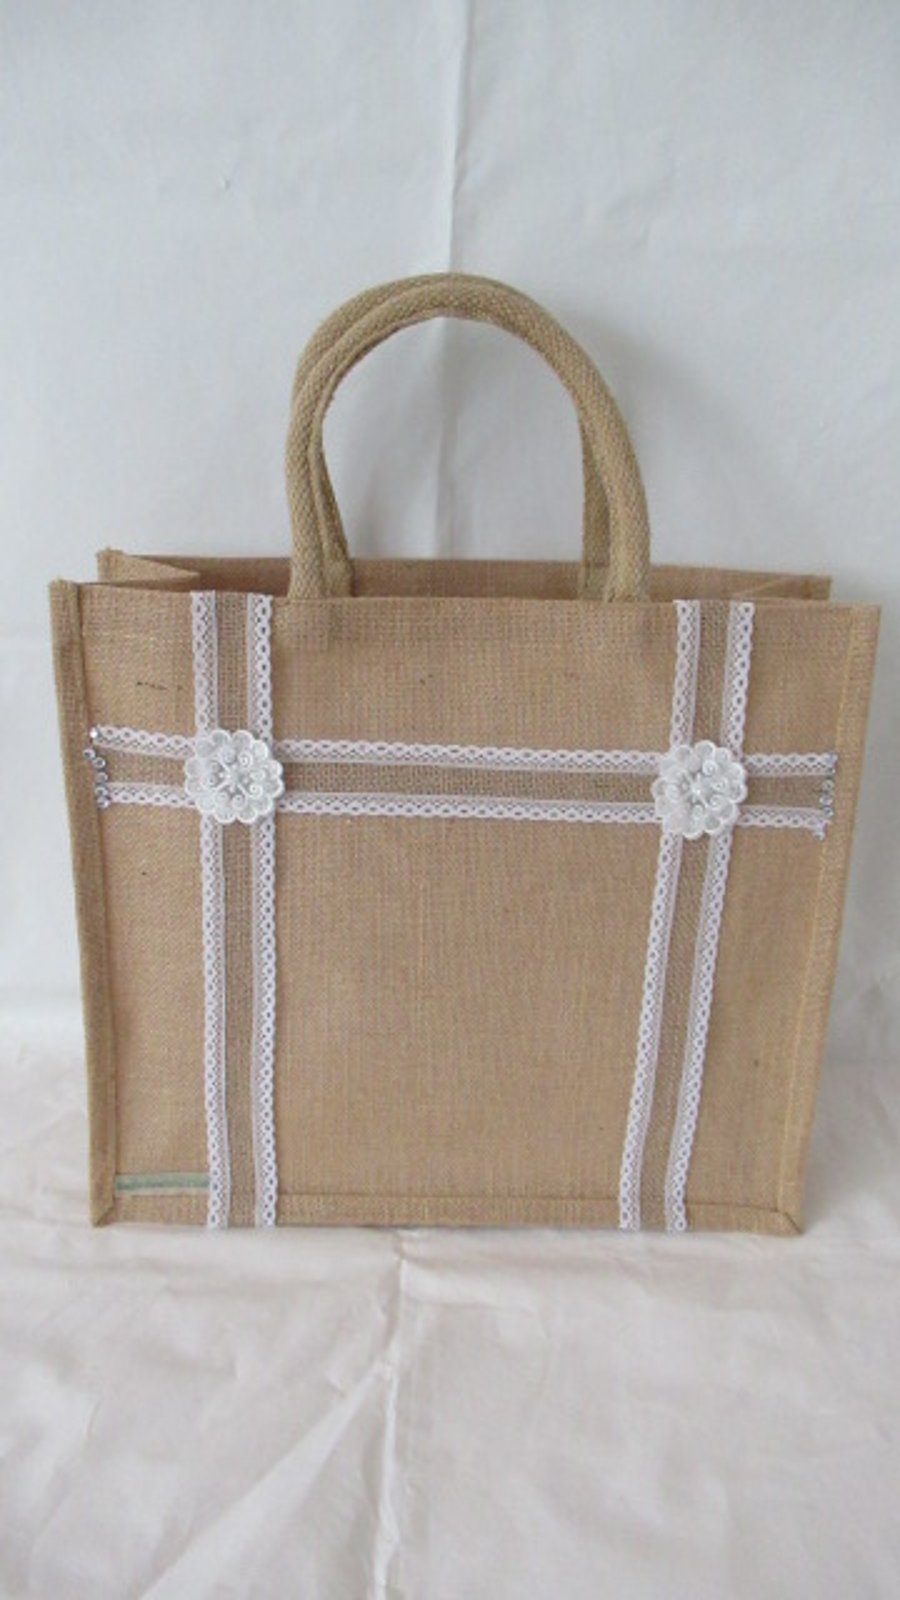 FLOWERS & LACE TRIMMED JUTE TOTE BAG